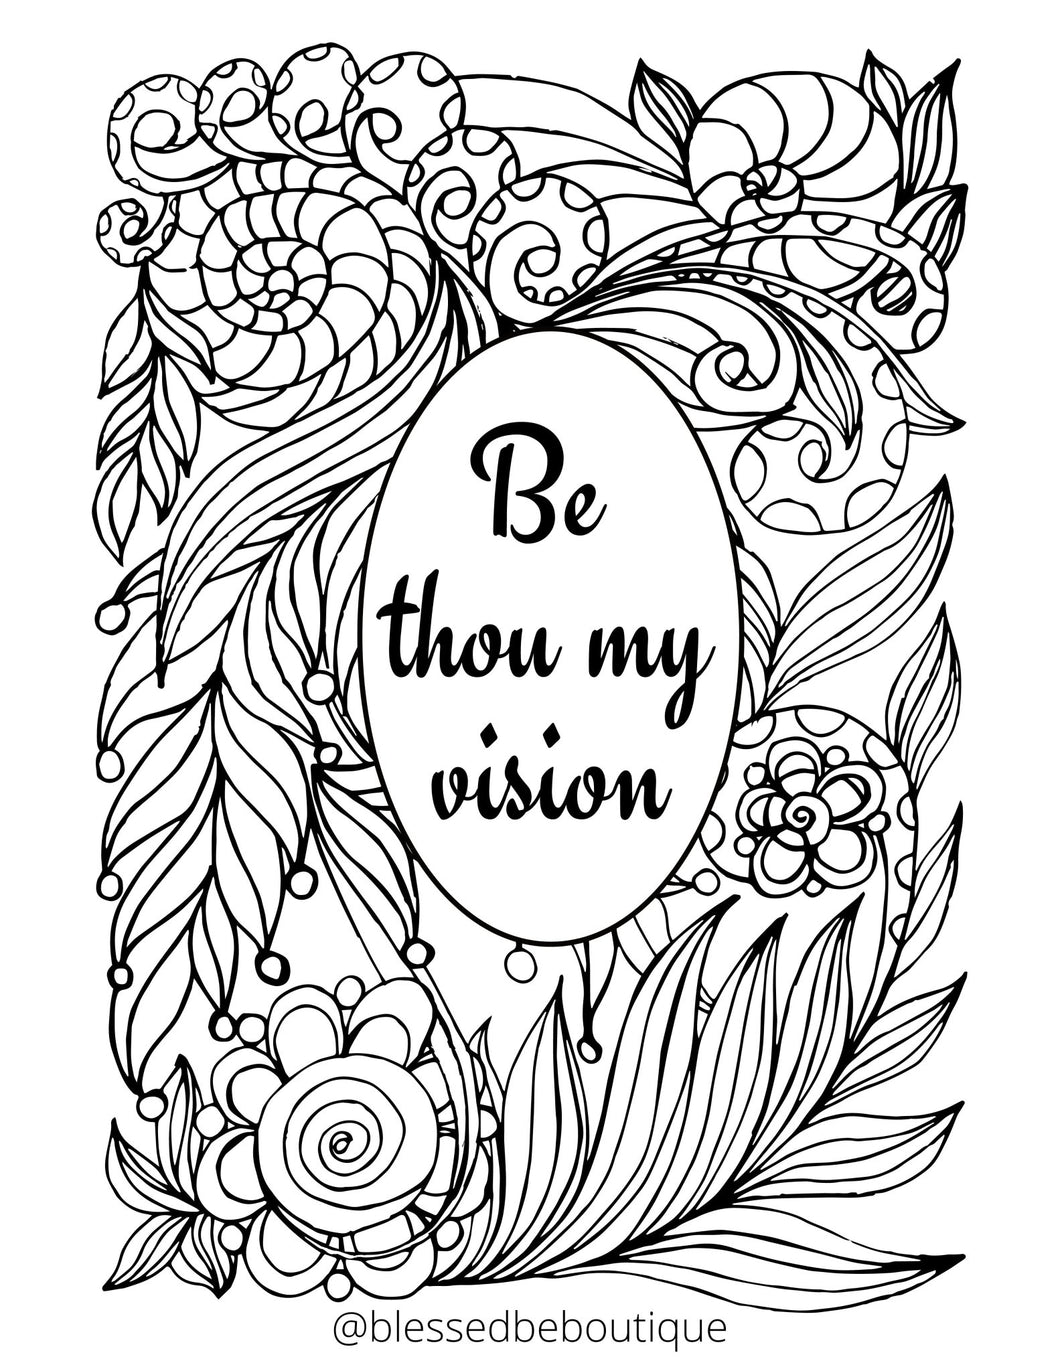 Be Thou My Vision - Blessed Be Boutique